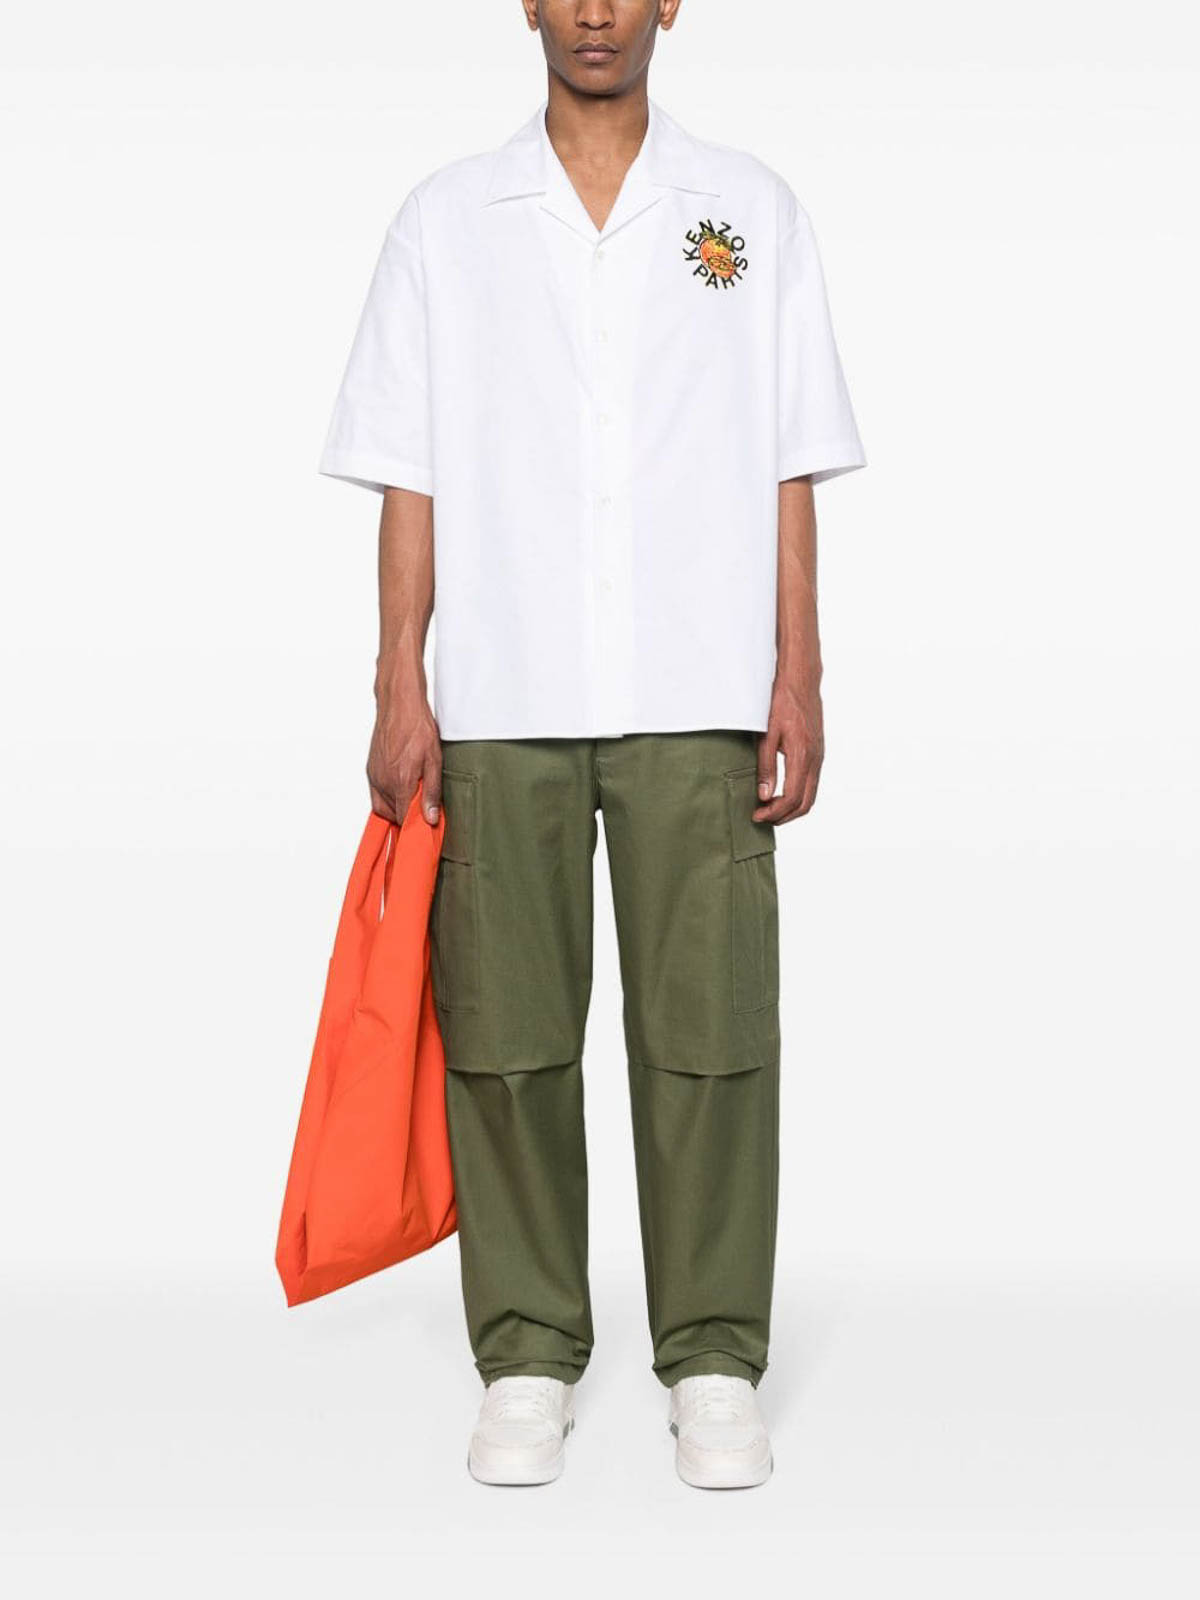 Shop Kenzo Logo Embroidery Shirt In White